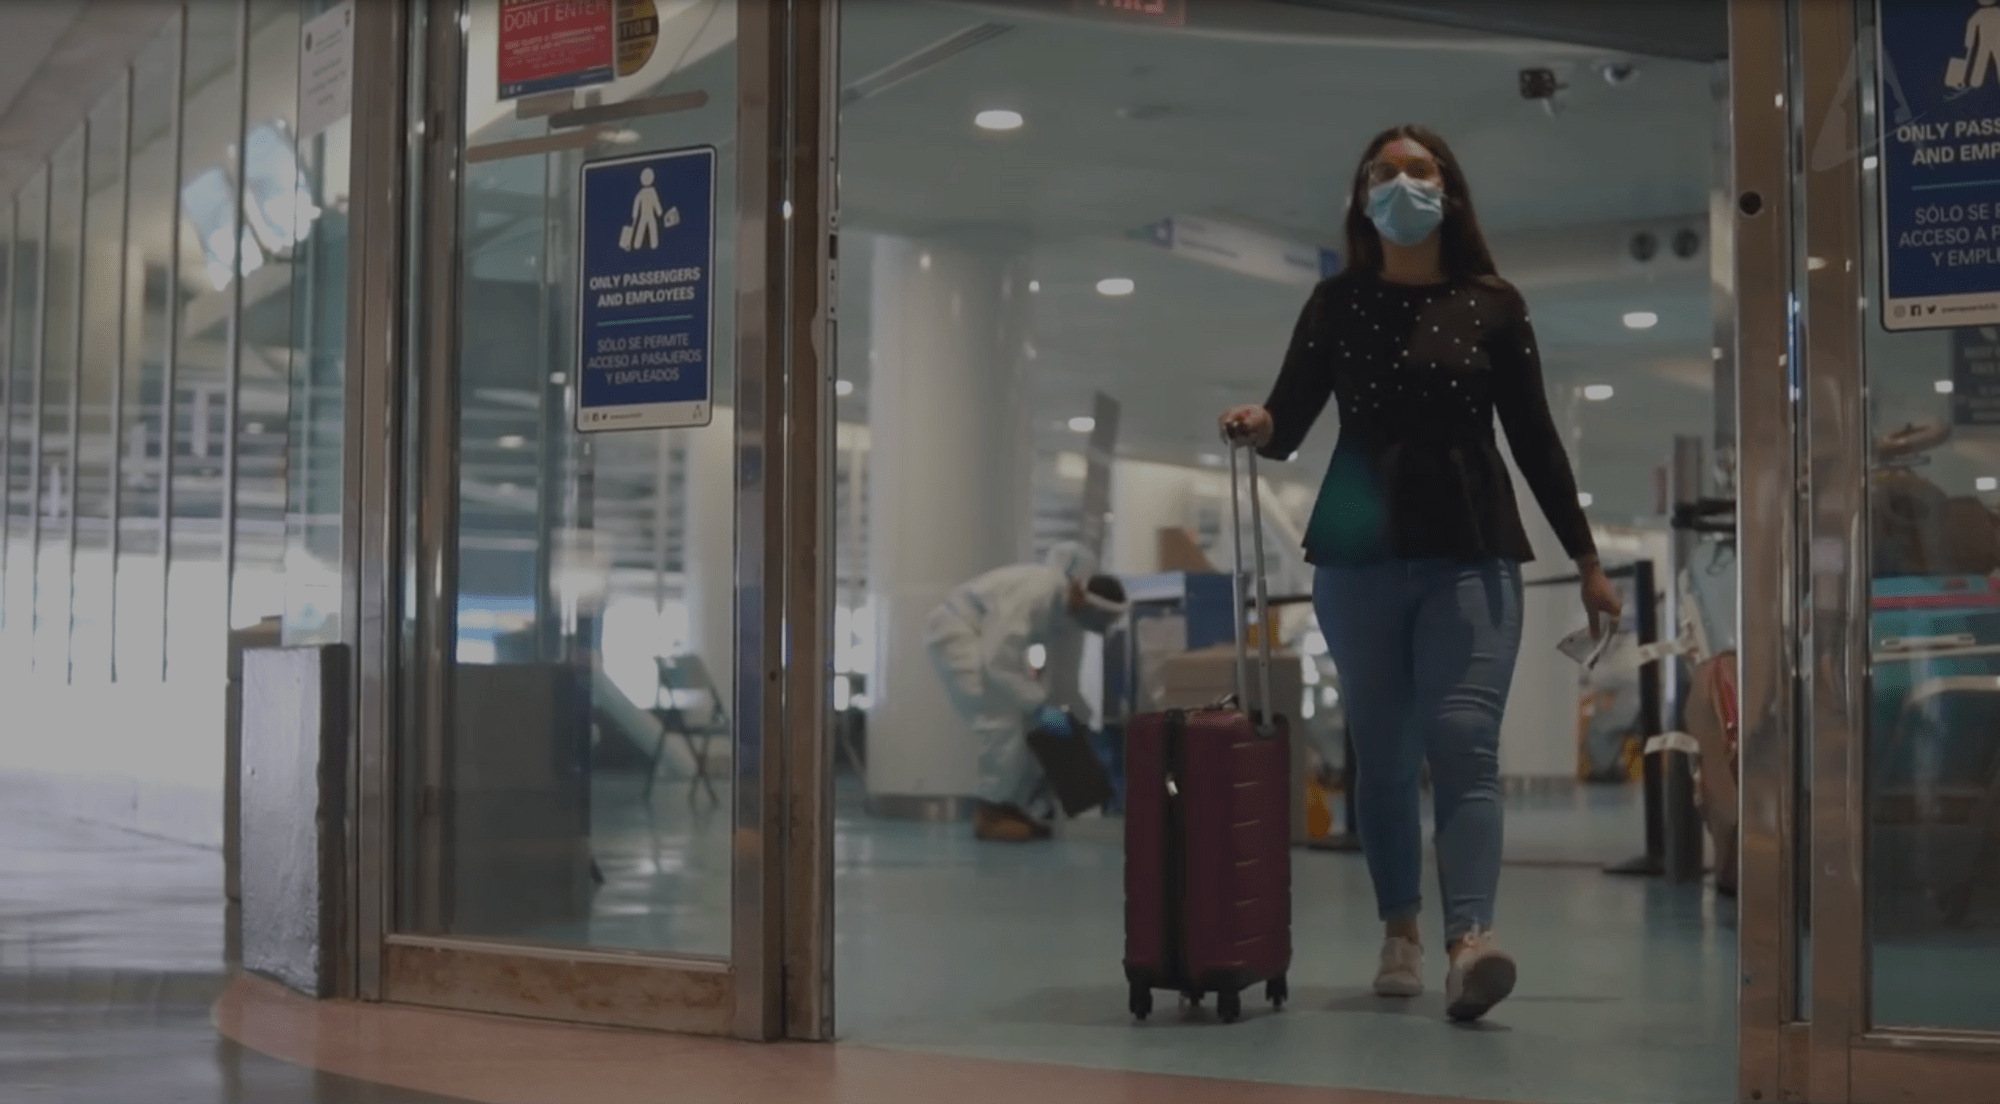 Myths and truths about traveling in the midst of the pandemic